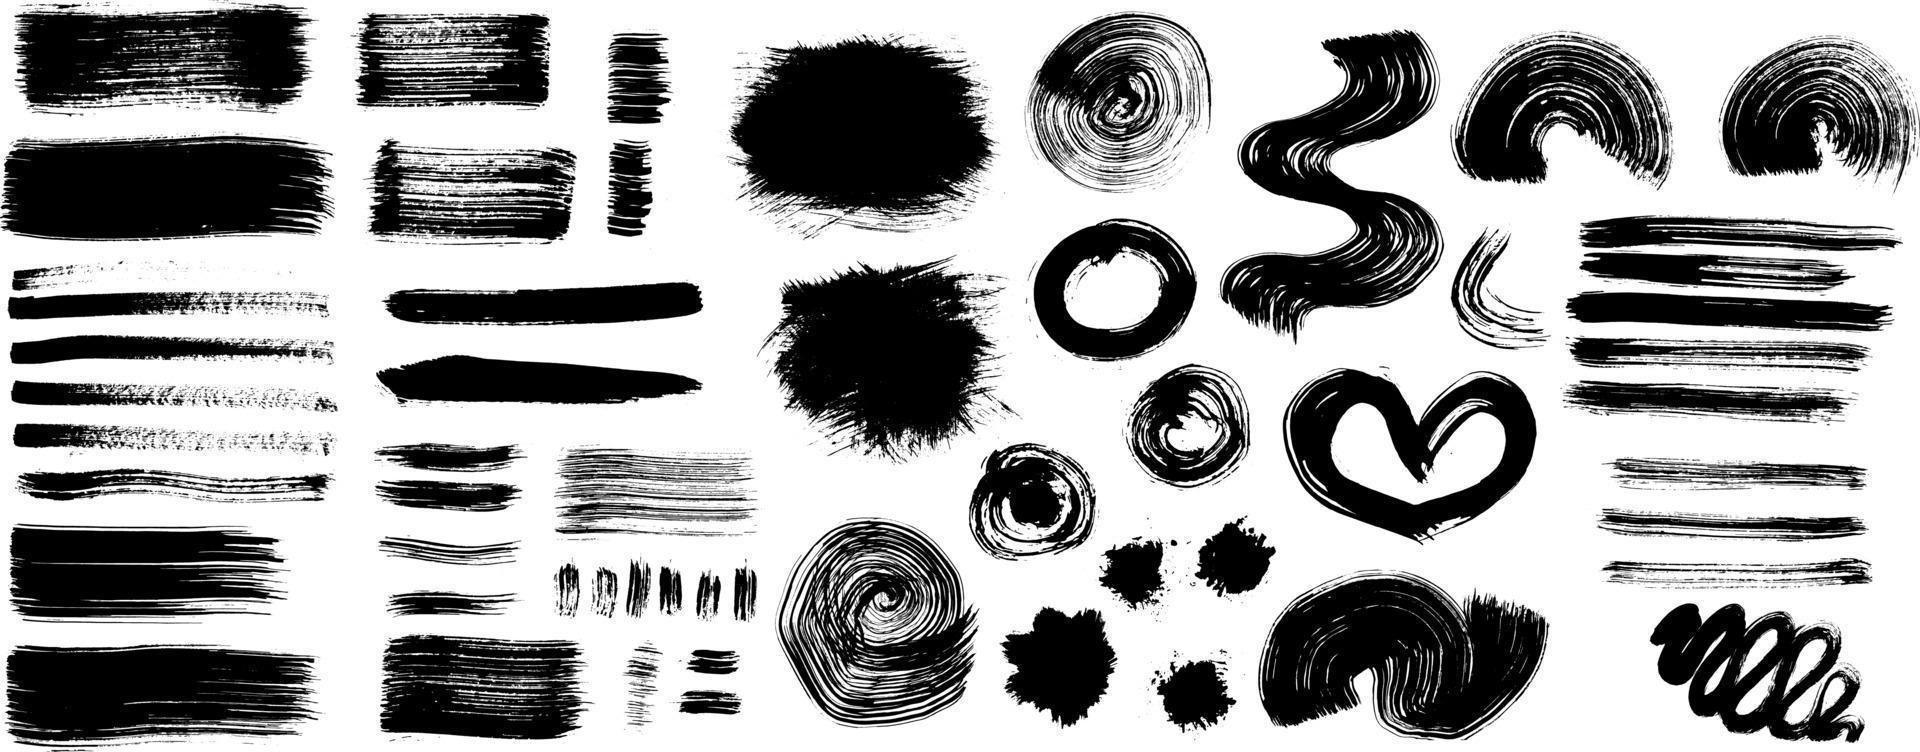 Grunge black and white urban vector big set textures template. Dark Dirty Dust Overlay Distress Background. Easily create an abstract dotted, scratched, vintage effect with noise and grain